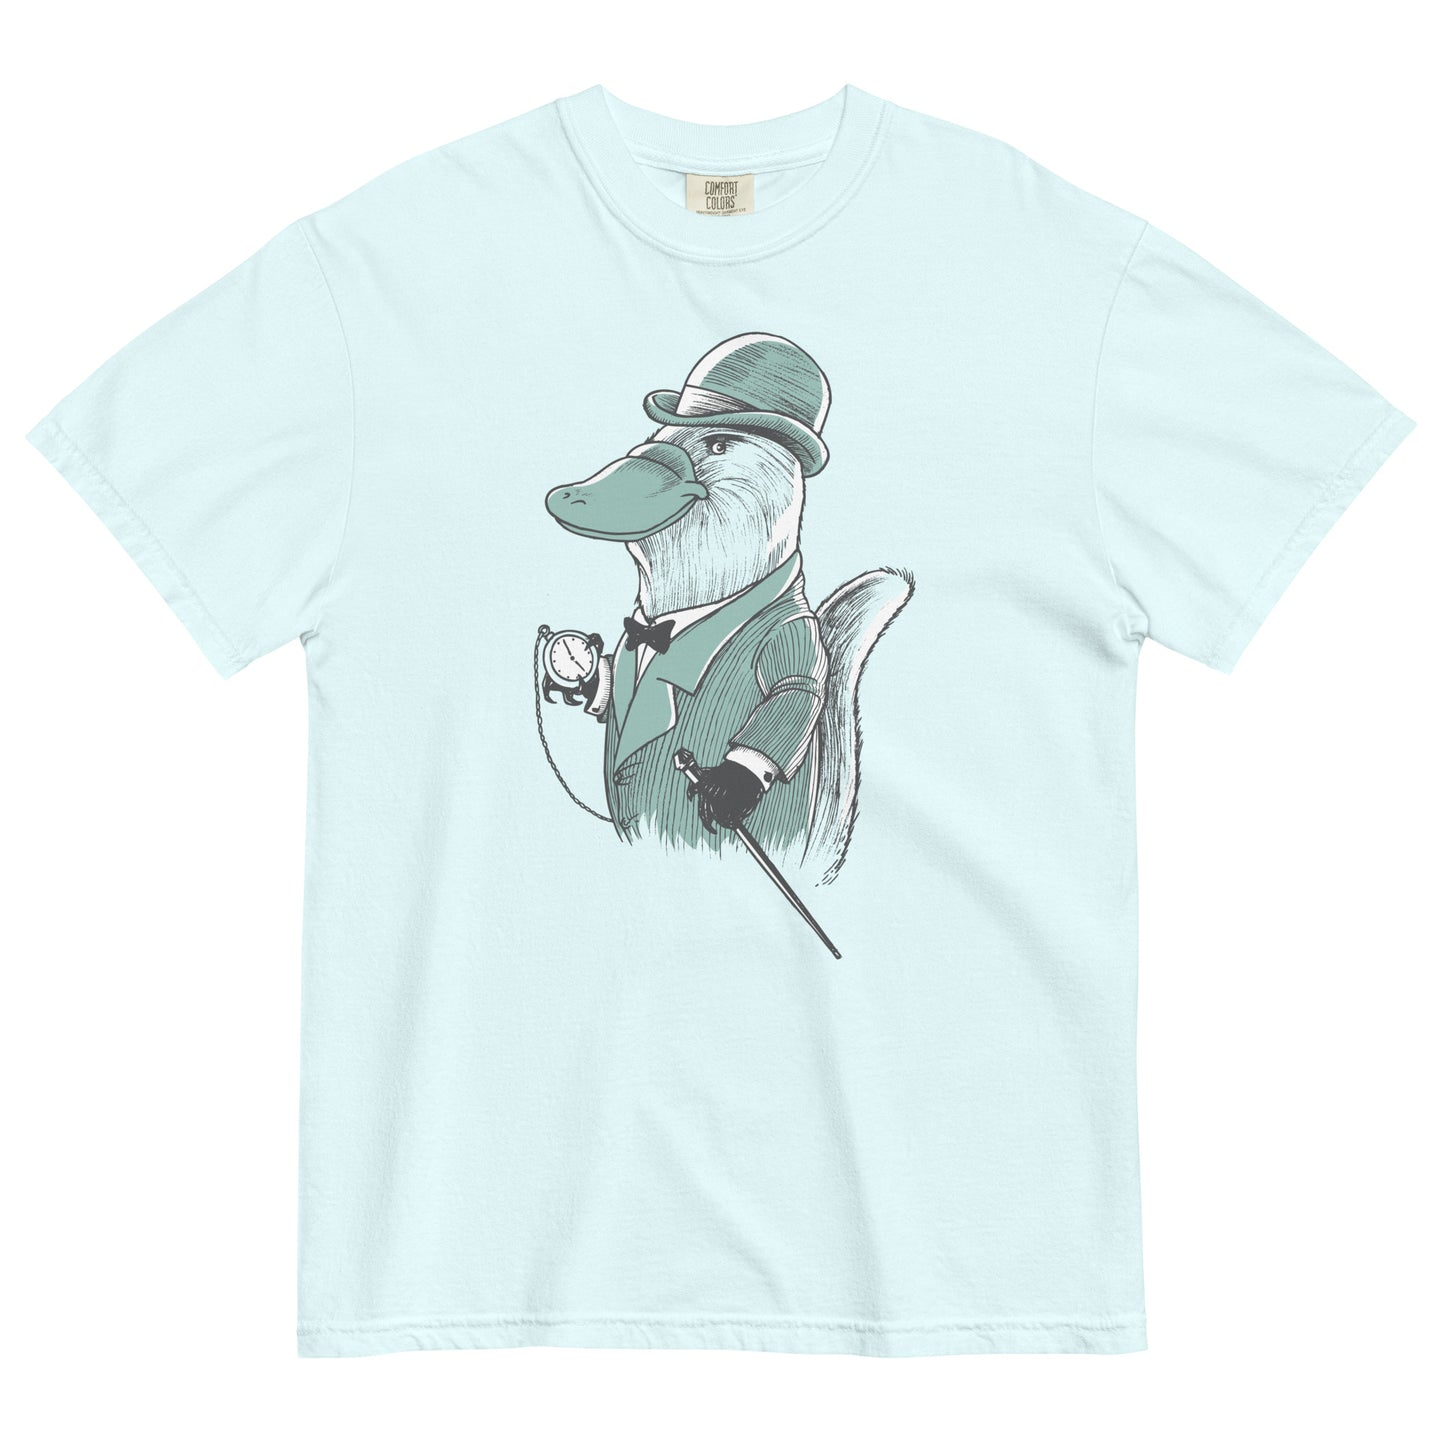 Duke Platypus Men's Relaxed Fit Tee